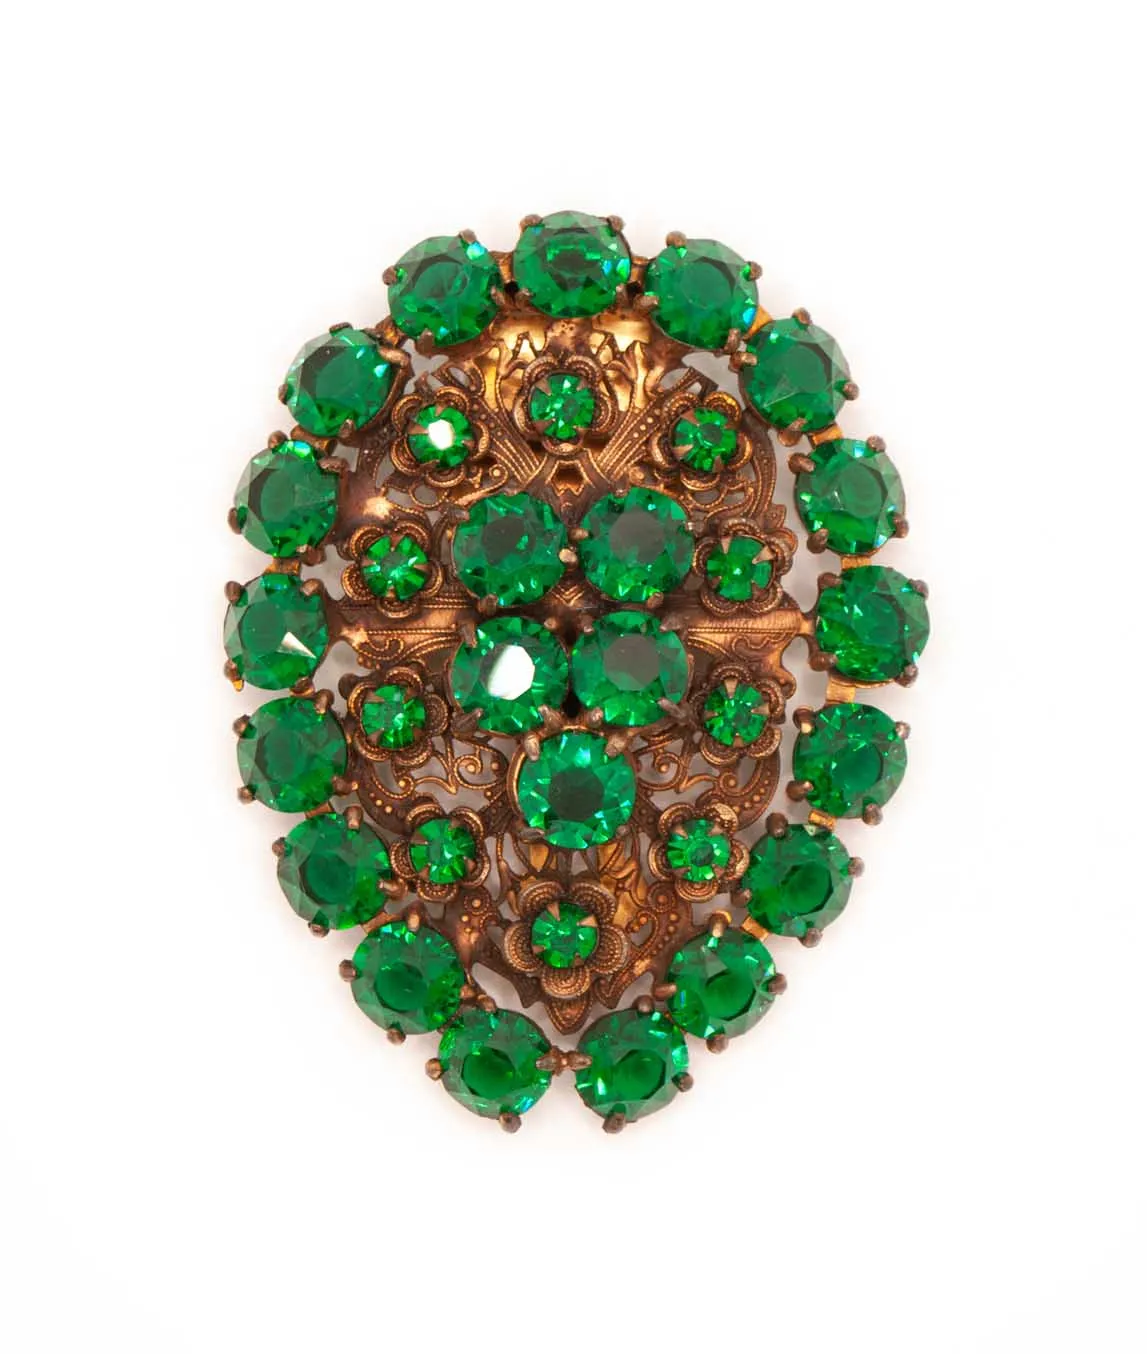 Large green glass Czech dress clip with copper floral settings